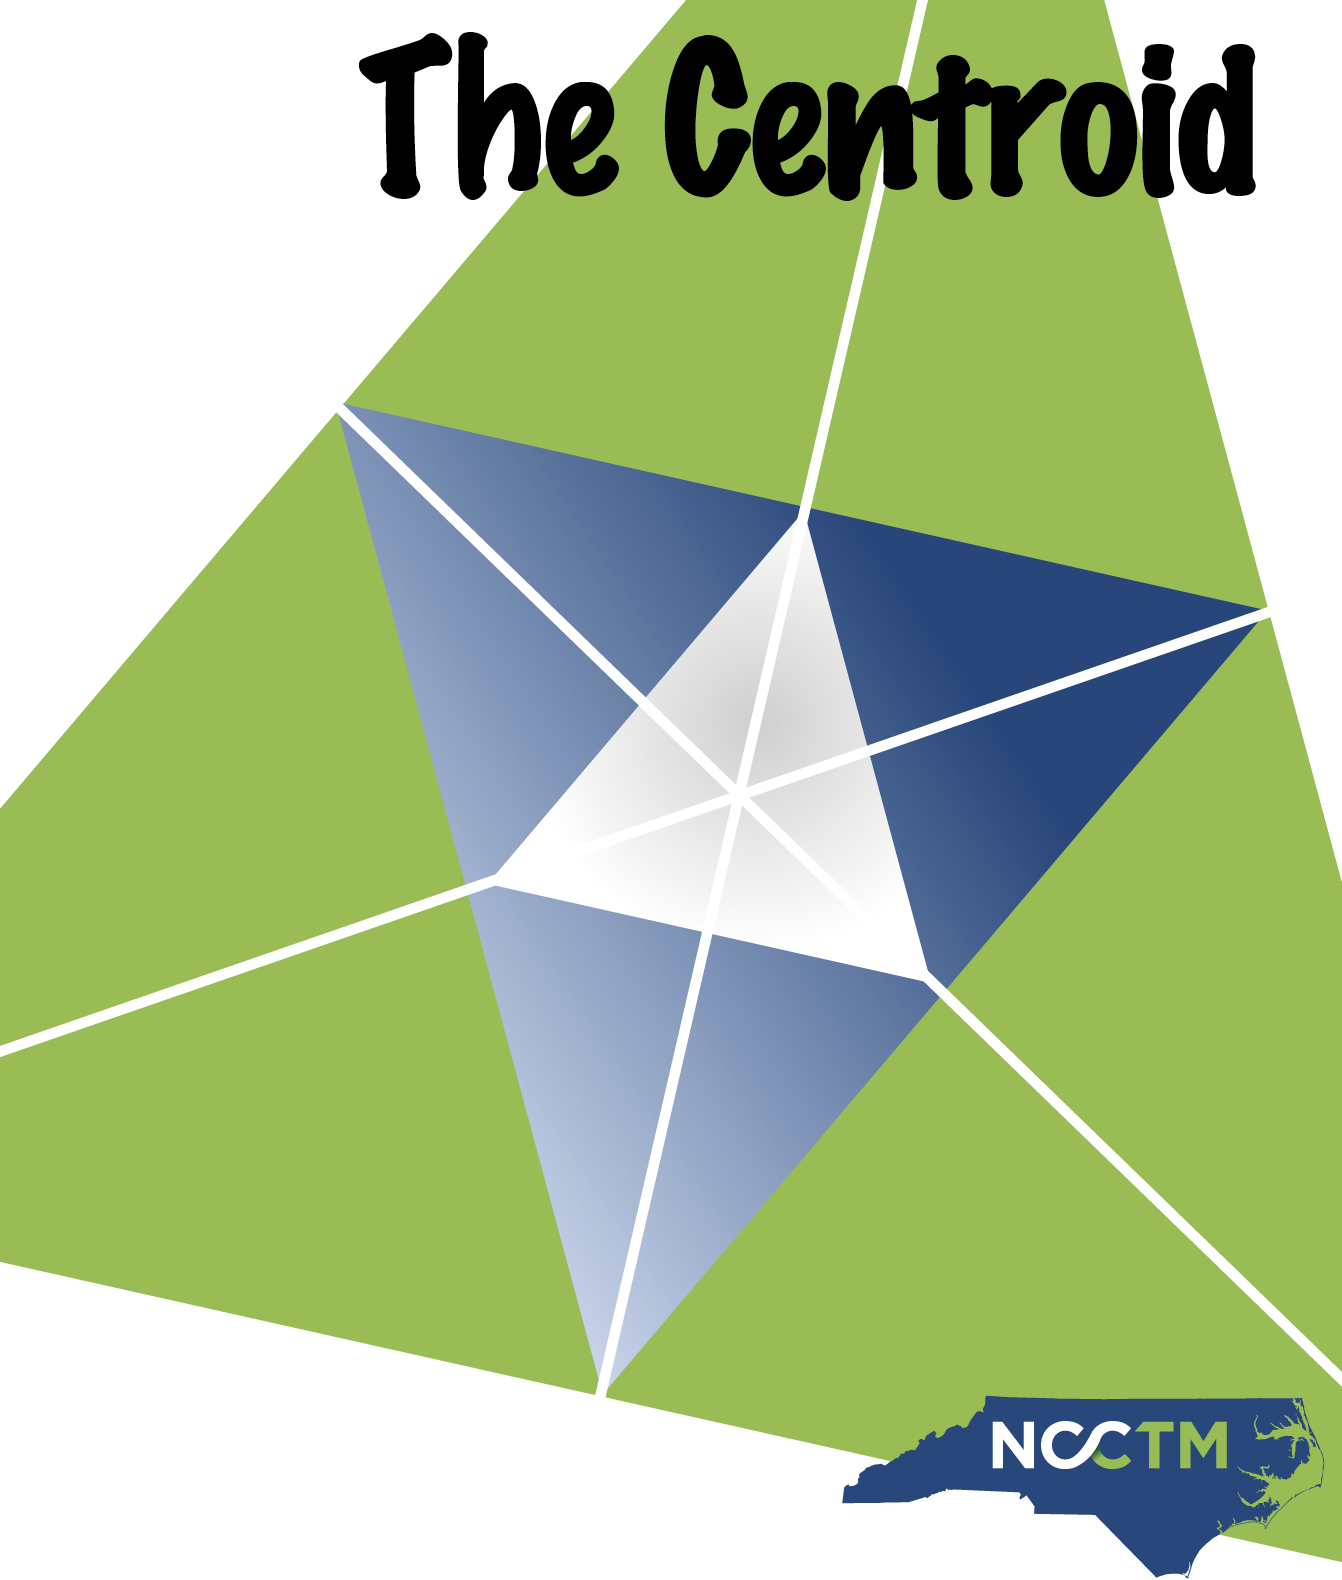 The Centroid Magazine from NCCTM